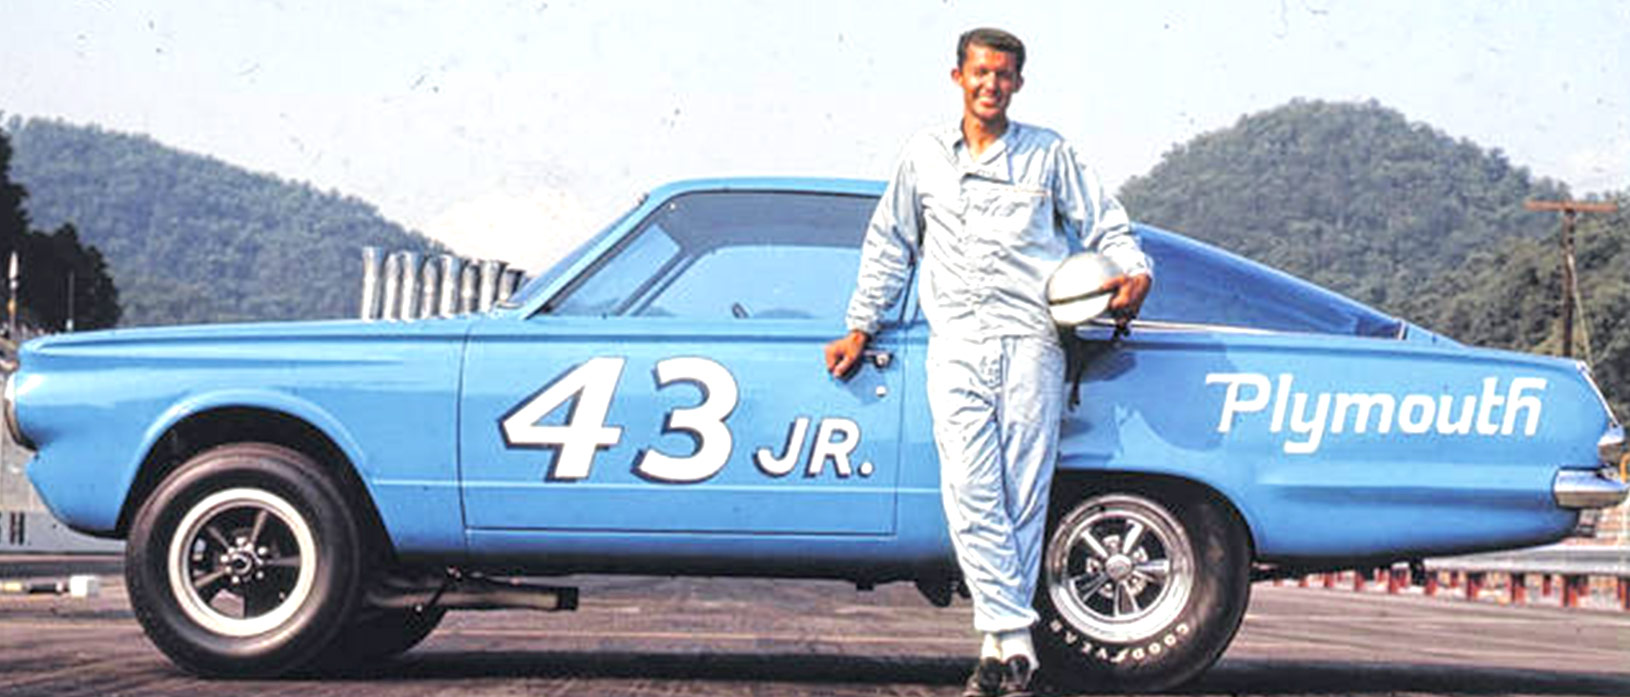 Richard Petty standing in front of his race car